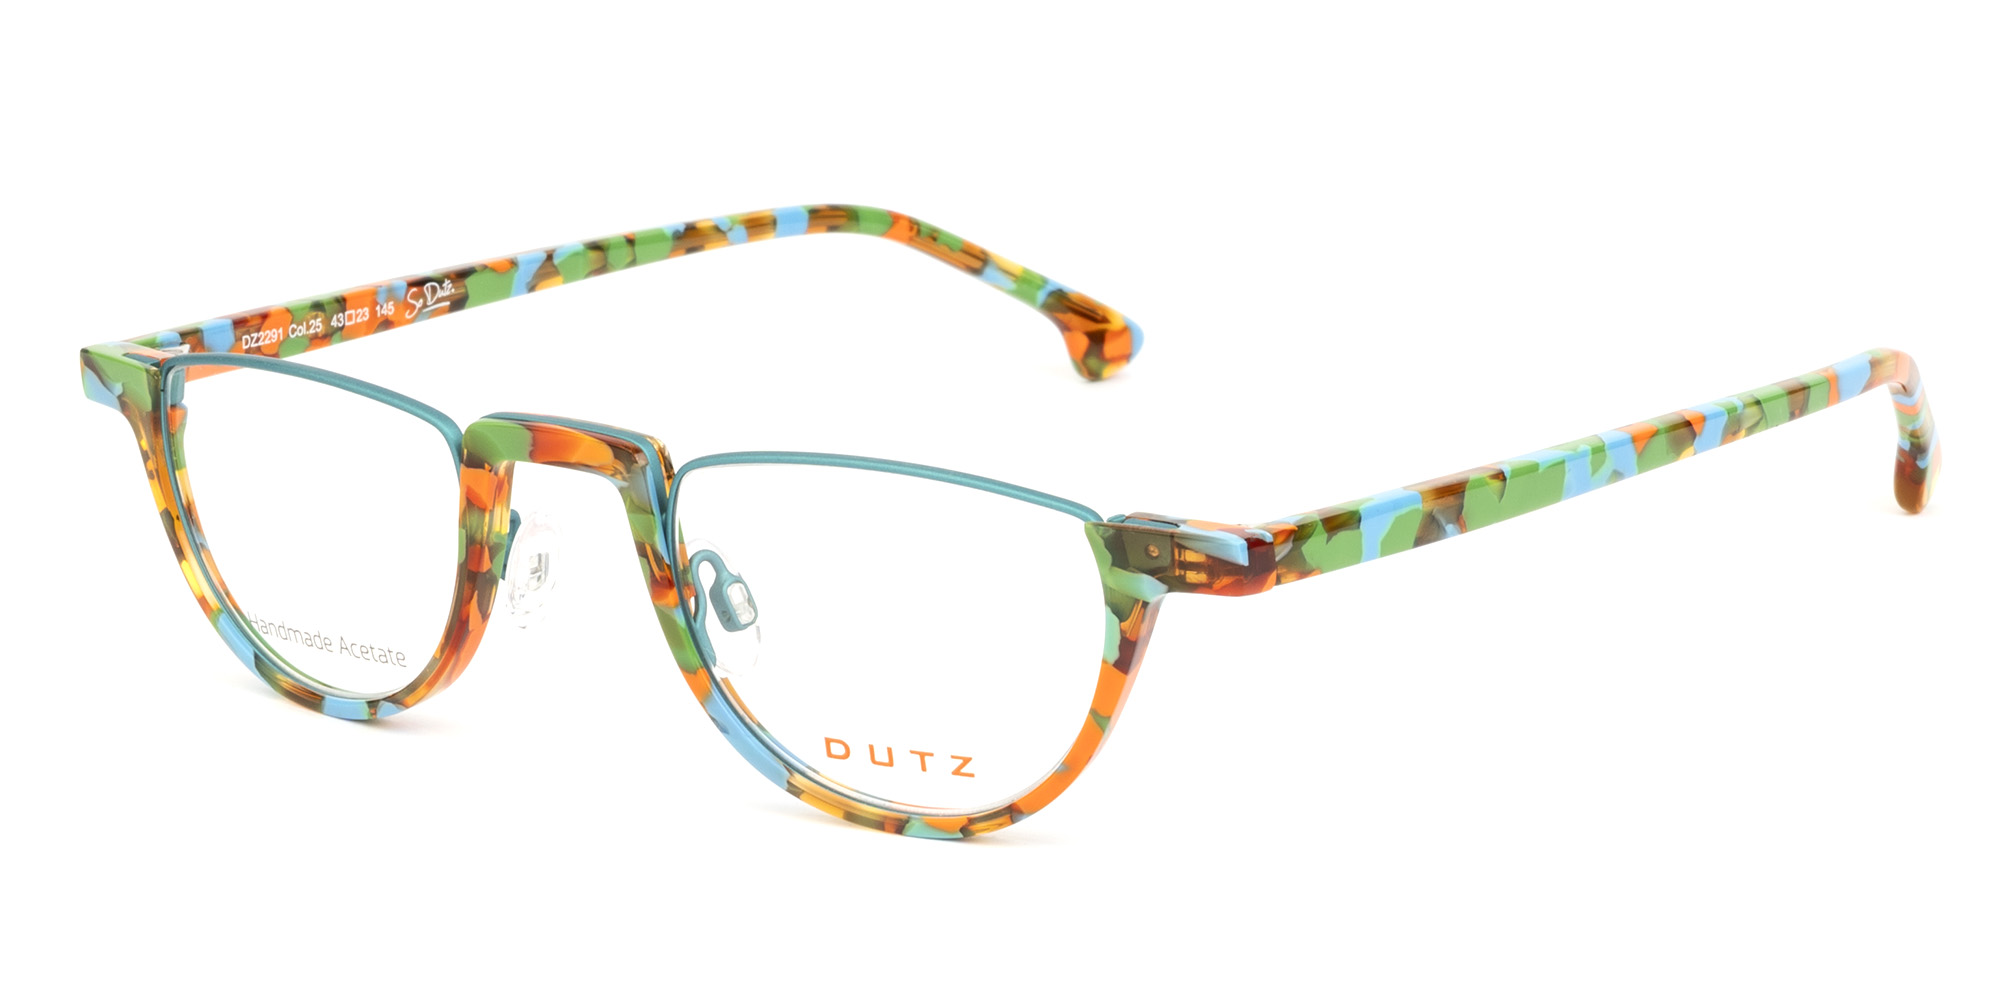 Aqua blue metal, combined with orange-green based multicolor acetate frame. Assorted color acetate temples